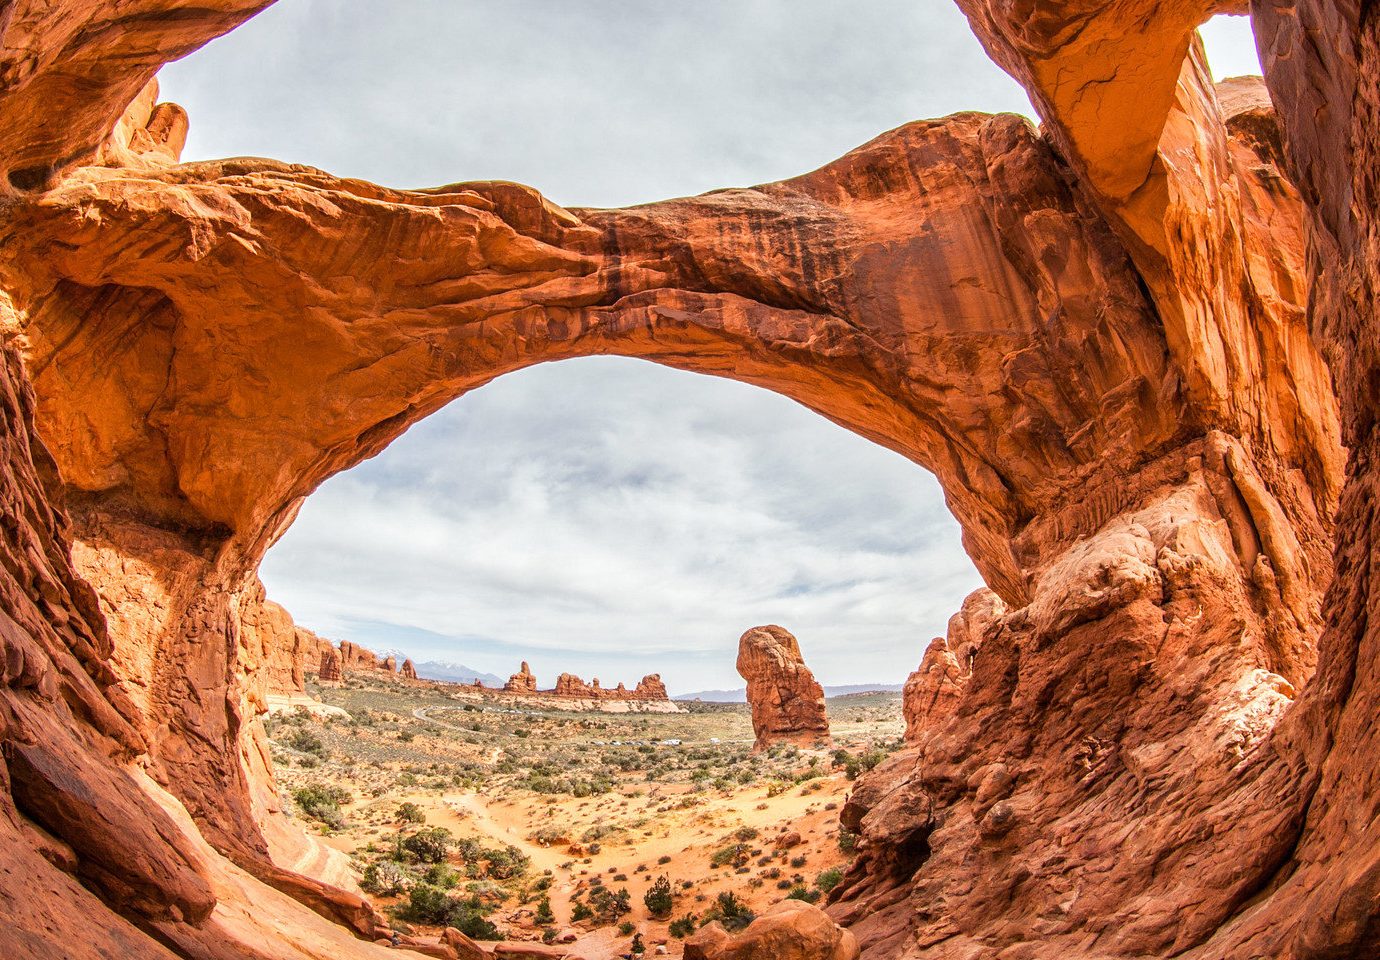 America American Southwest National Parks Outdoors + Adventure Road Trips Trip Ideas valley canyon outdoor Nature arch rock Architecture mountain natural arch wadi ancient history formation geology